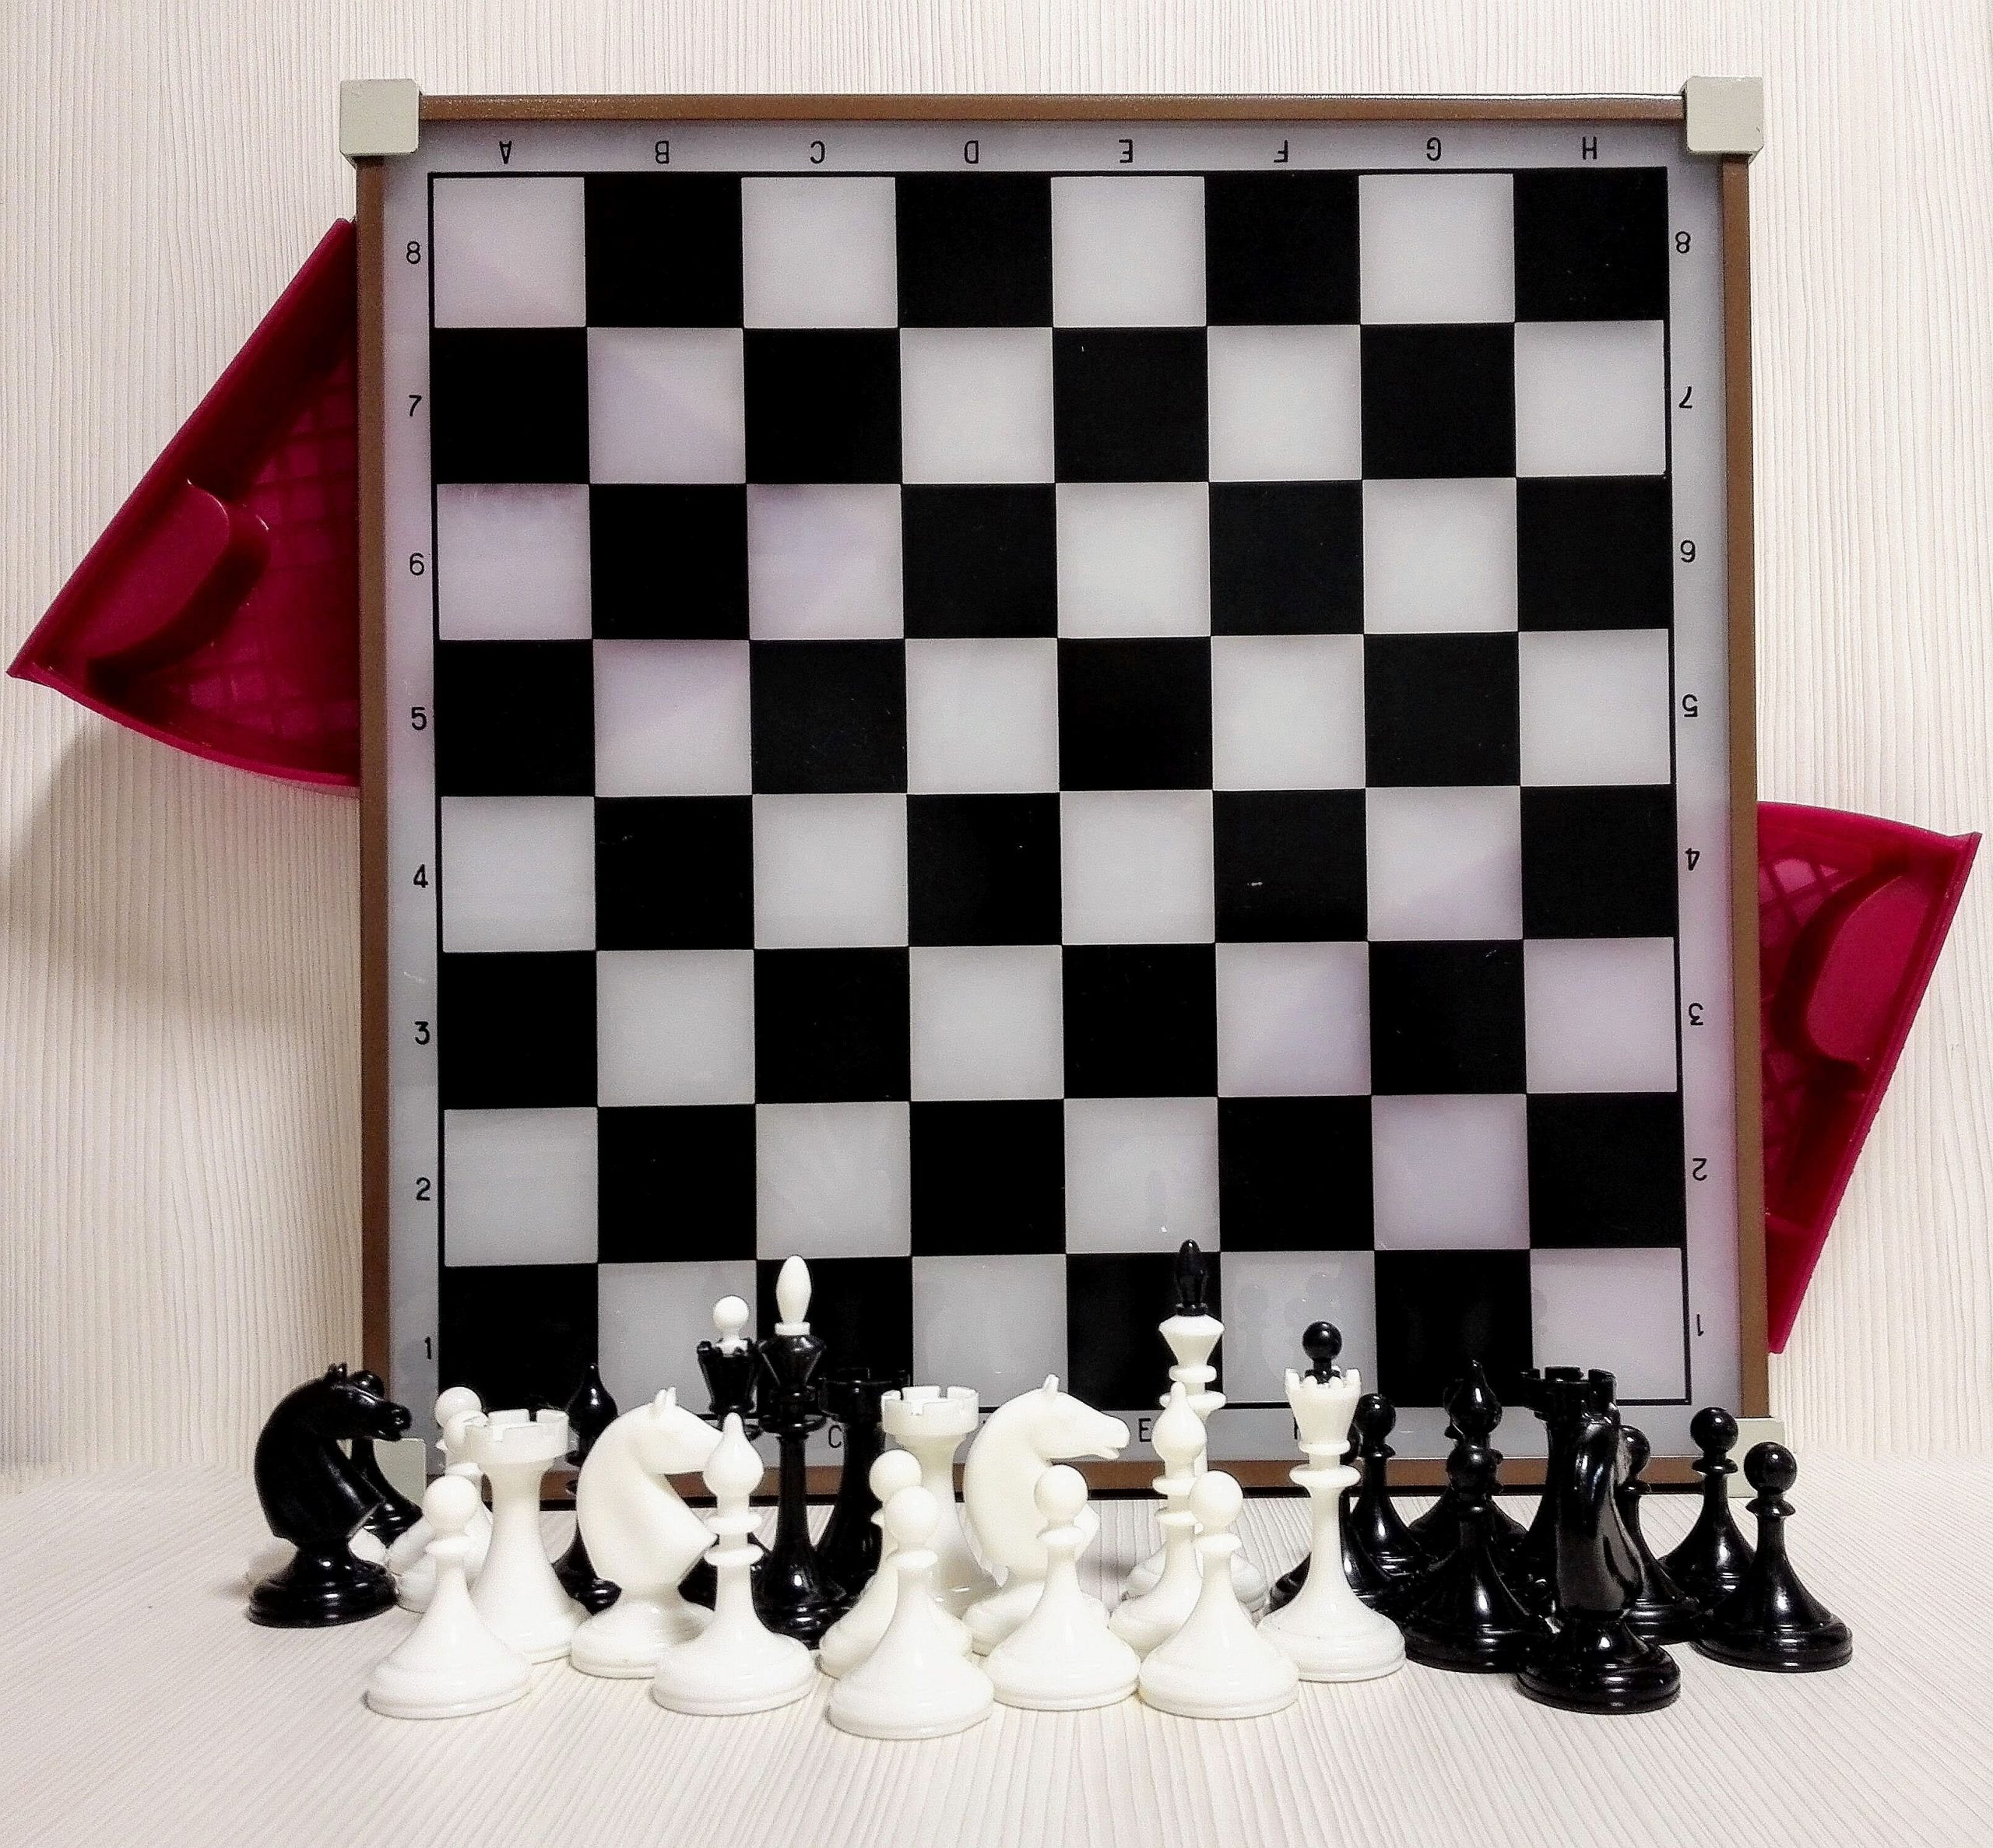  FEANG Checkers Set International Chess Checkers